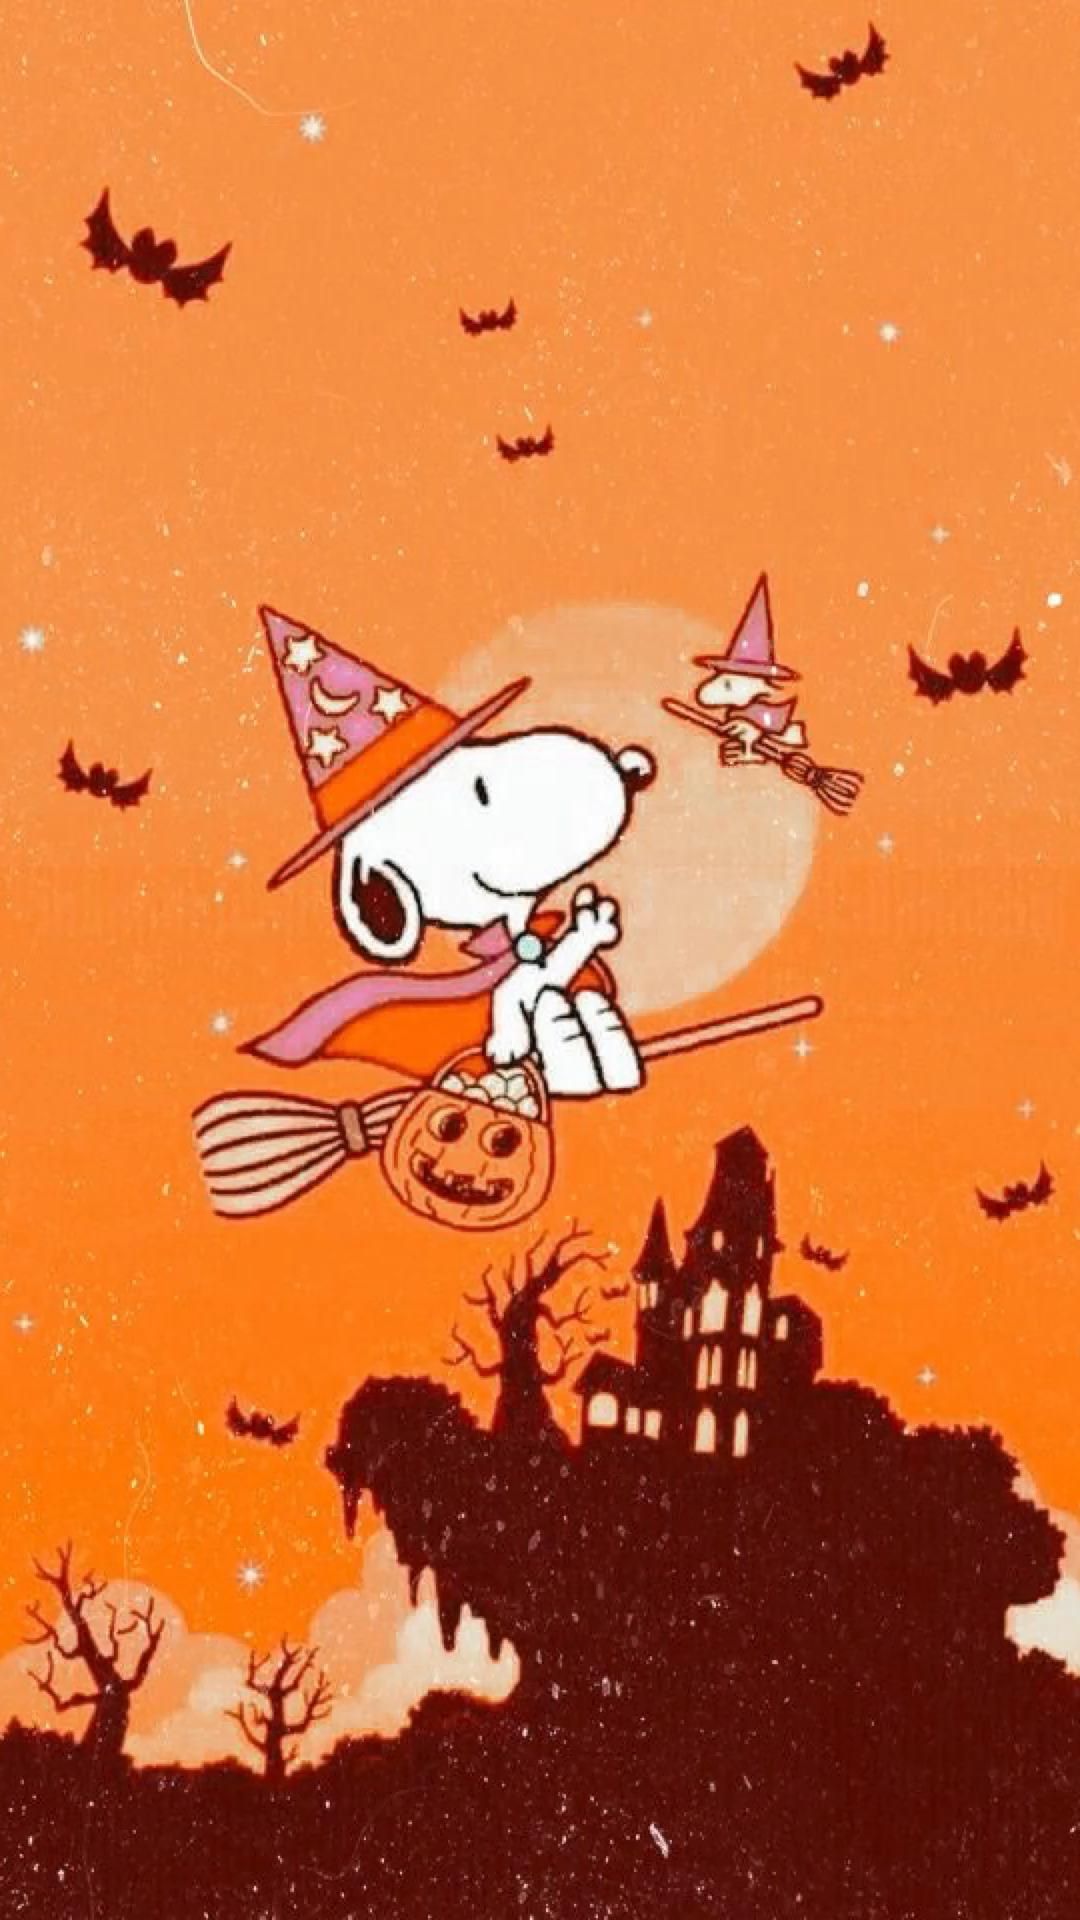 IPhone Wallpaper Halloween Snoopy with high-resolution 1080x1920 pixel. You can use this wallpaper for your iPhone 5, 6, 7, 8, X, XS, XR backgrounds, Mobile Screensaver, or iPad Lock Screen - Charlie Brown, Halloween